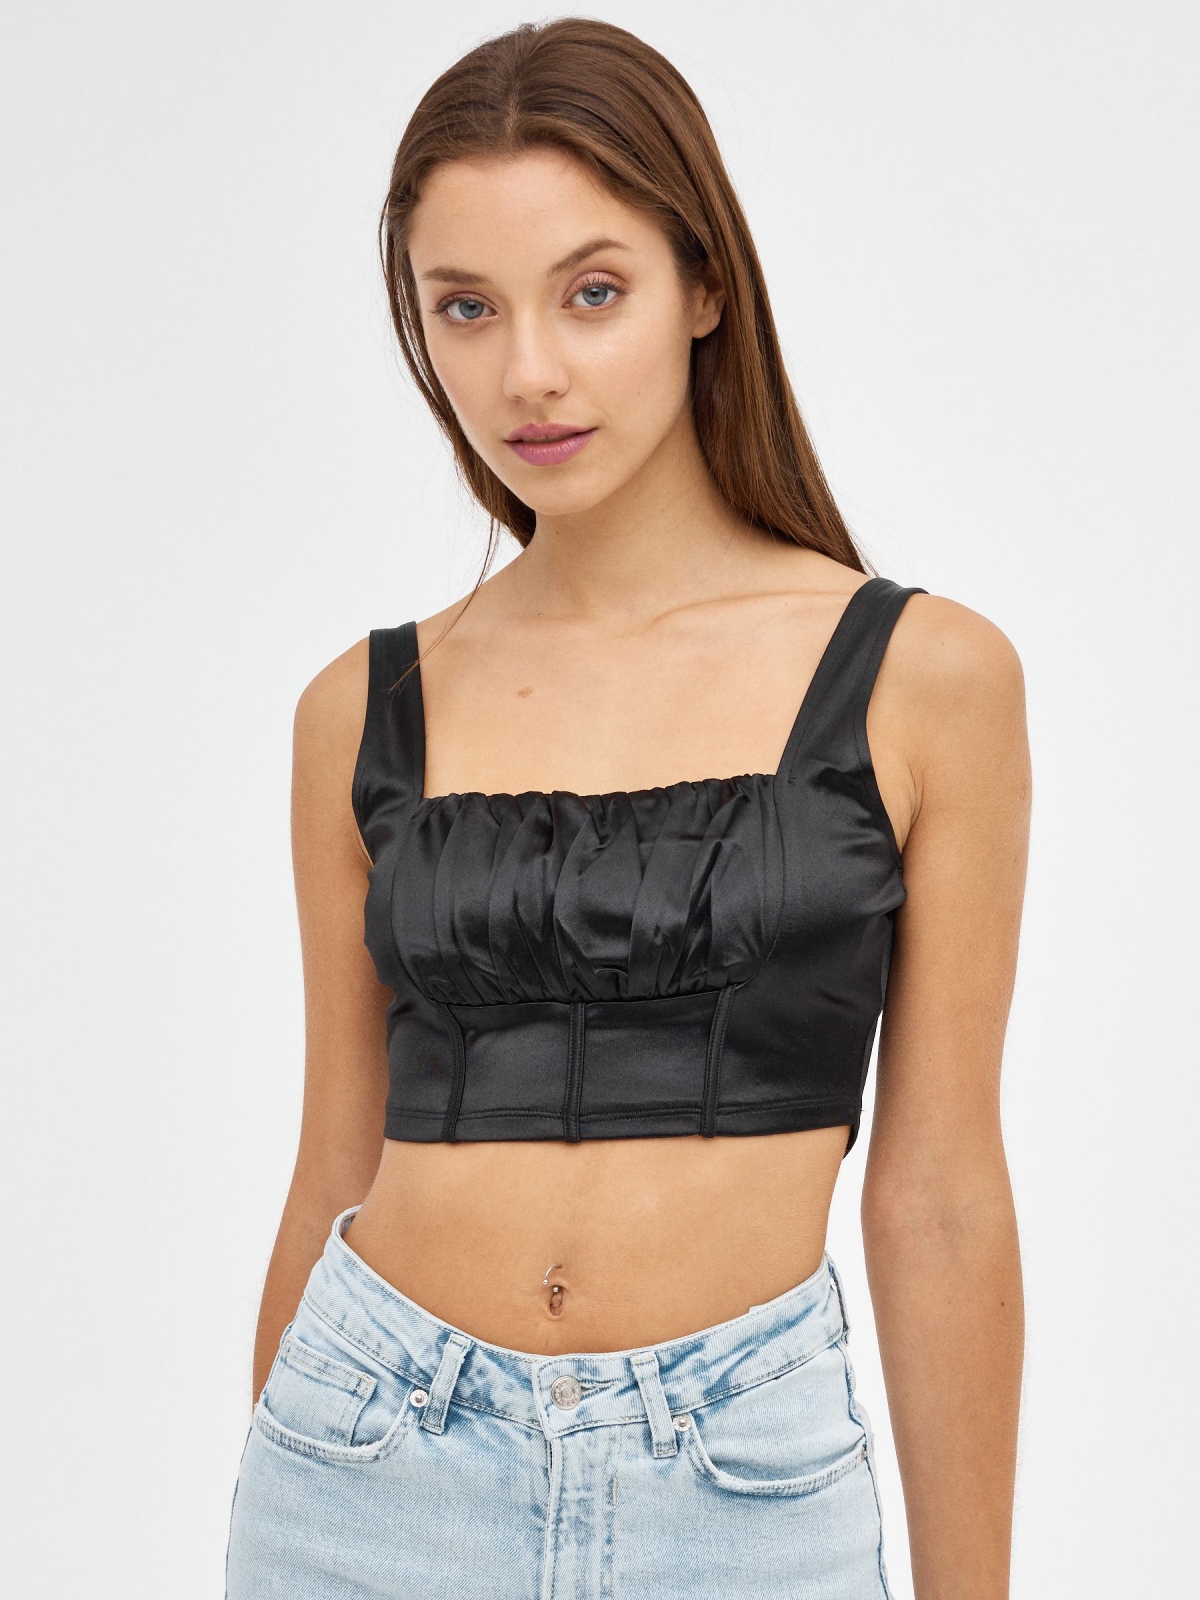 Satin Bustier Top black middle front view